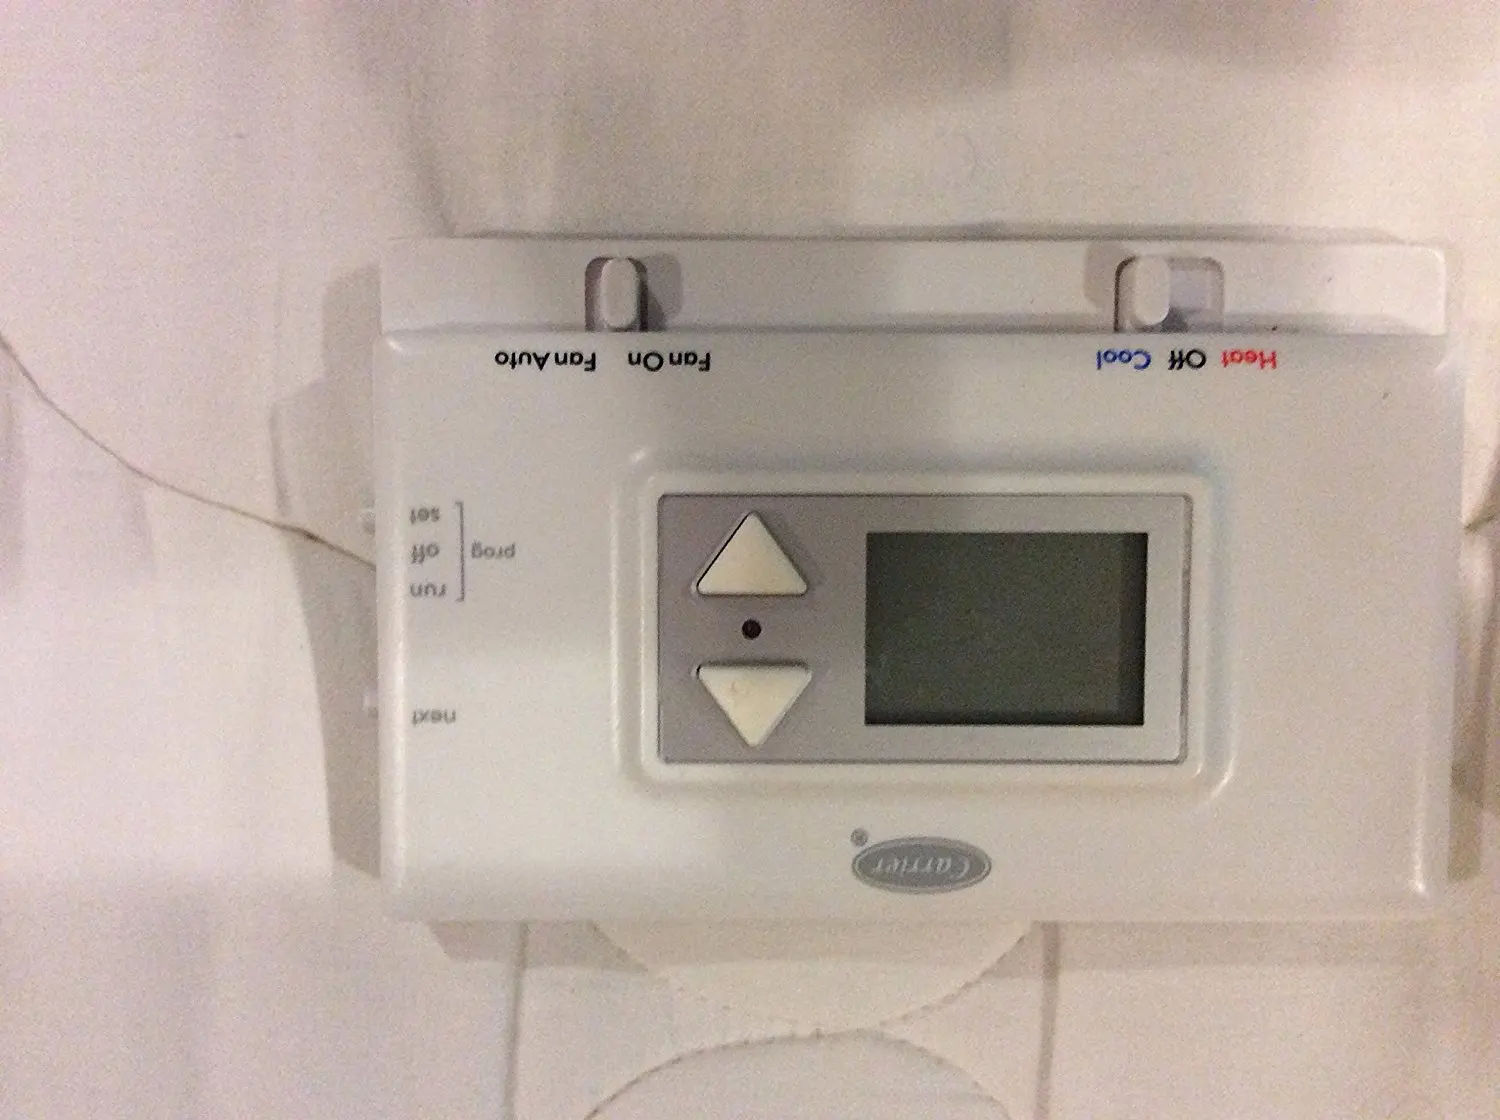 Cheap Carrier Thermostat Instructions, find Carrier Thermostat